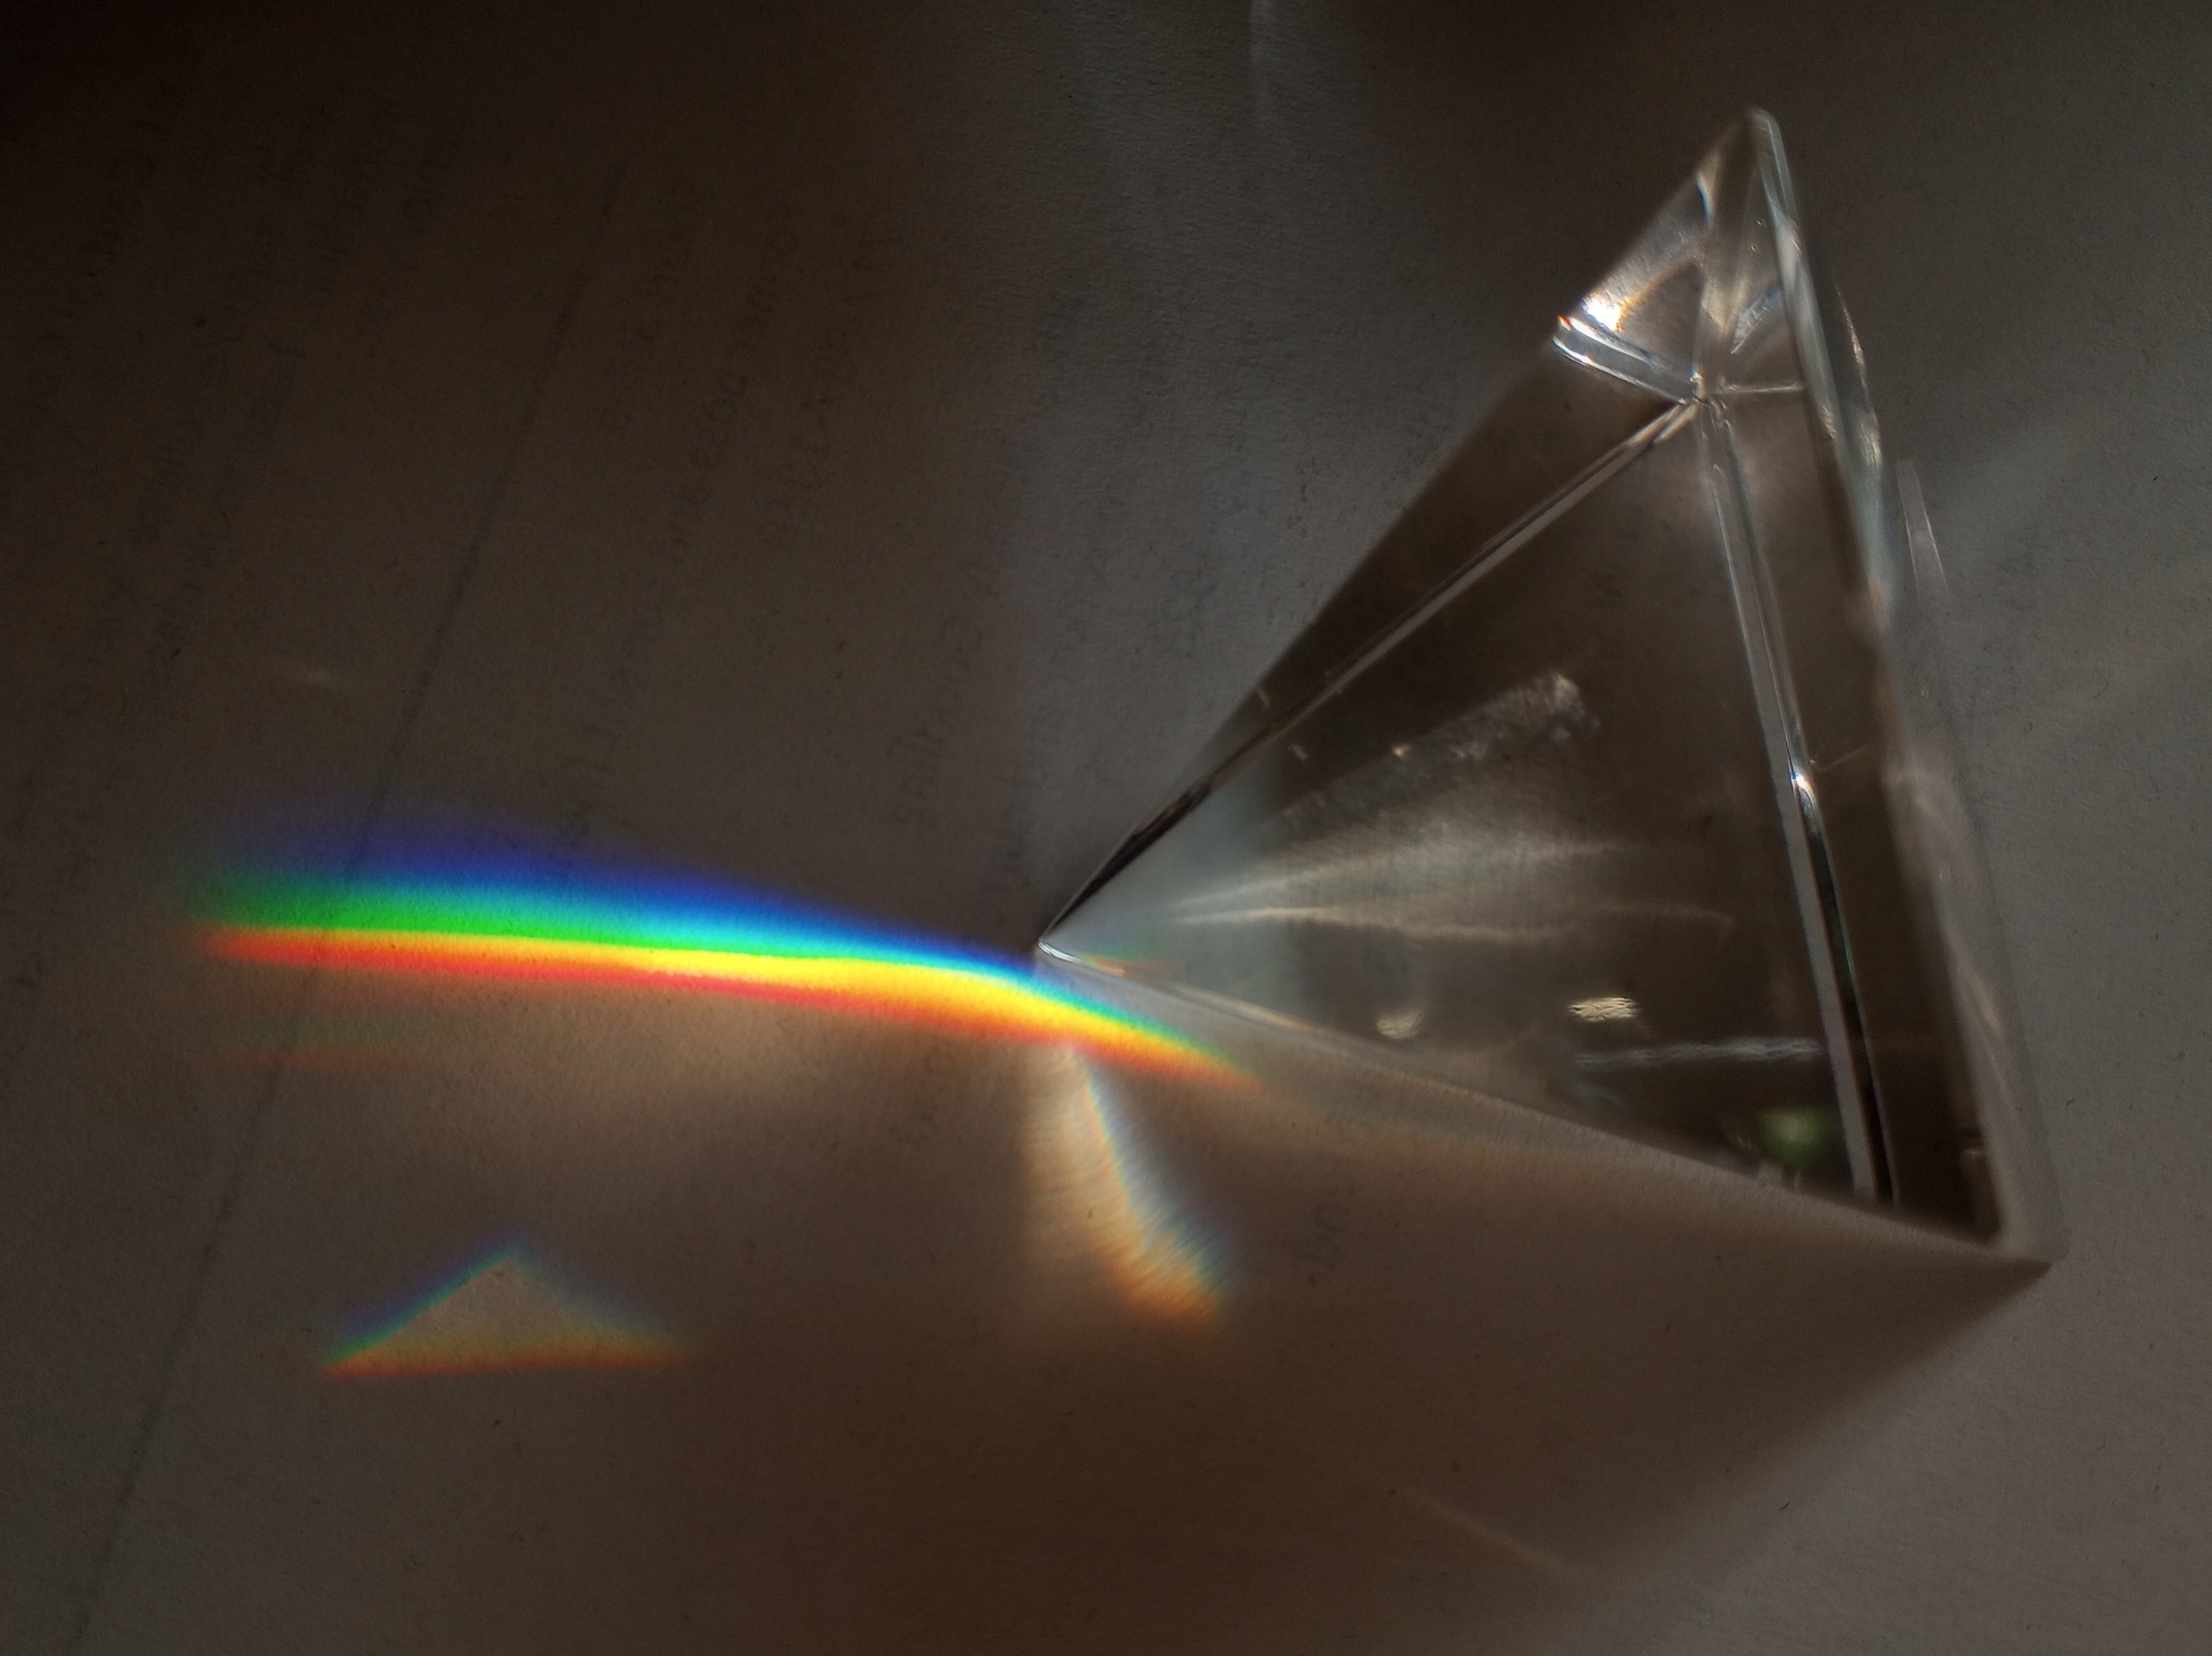 photo of a pyramid shaped crystal on one of its sides, casting a short rainbow on the counter